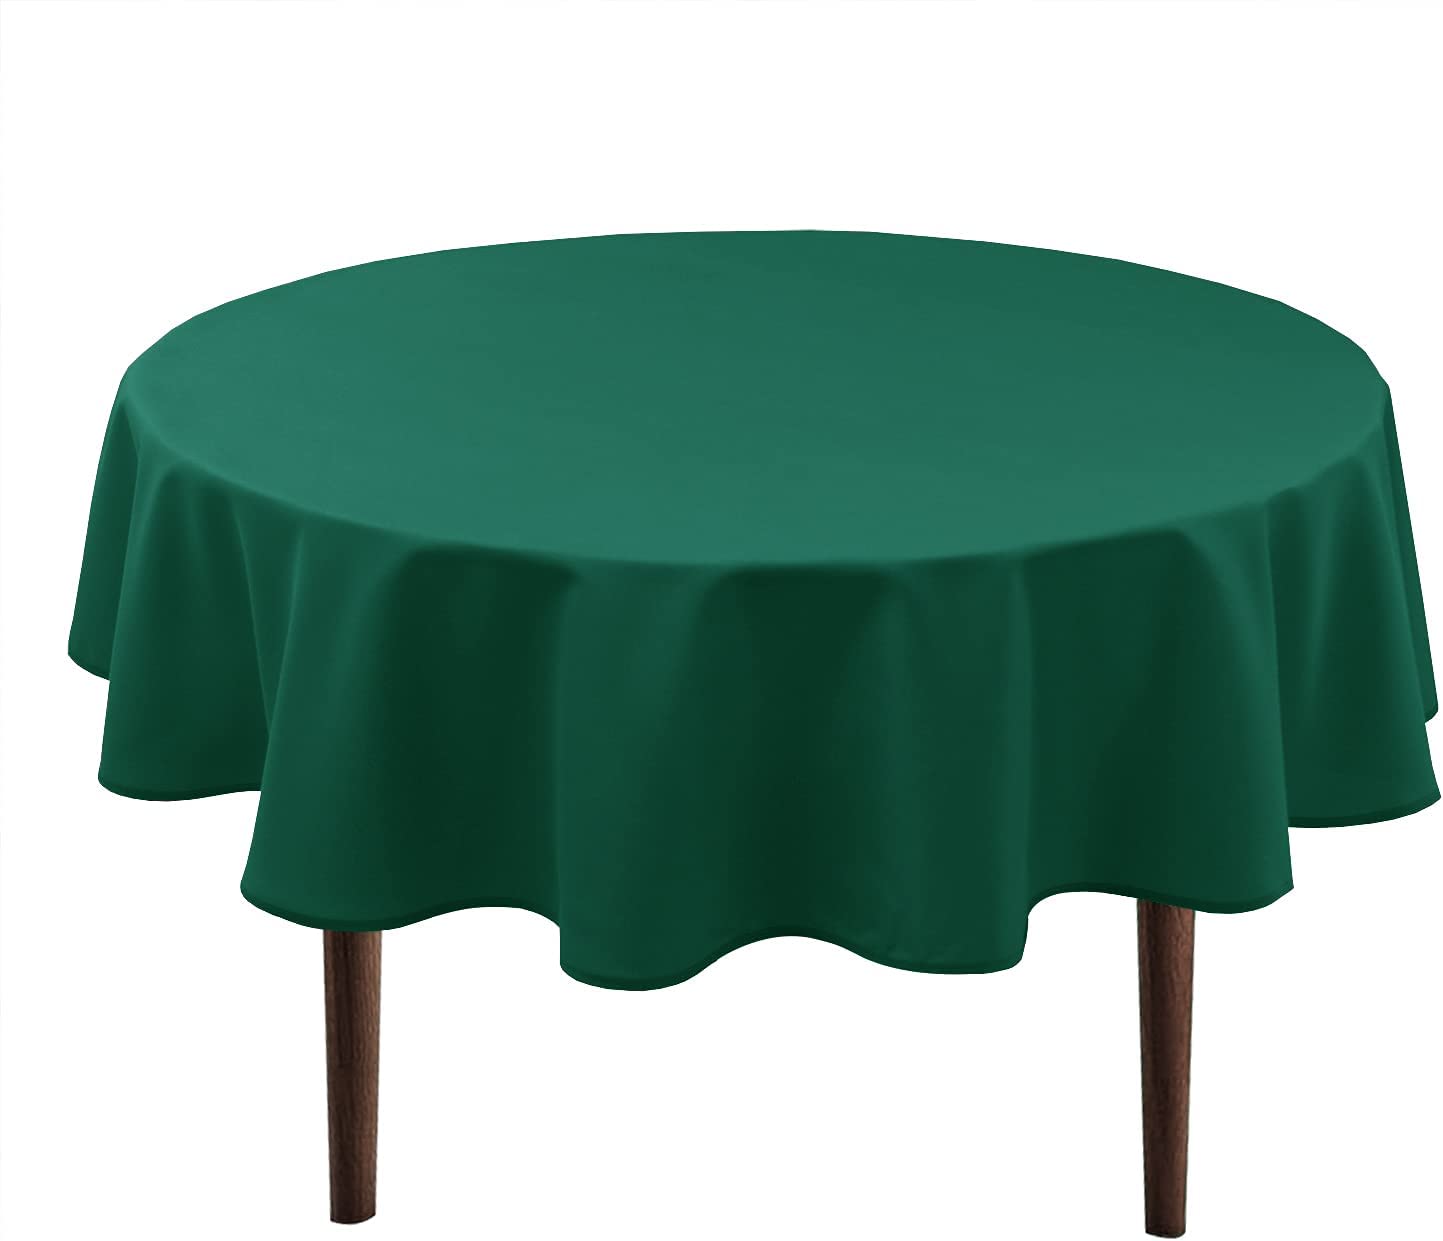 60 Inch Round Tablecloth (Olive Green Color)